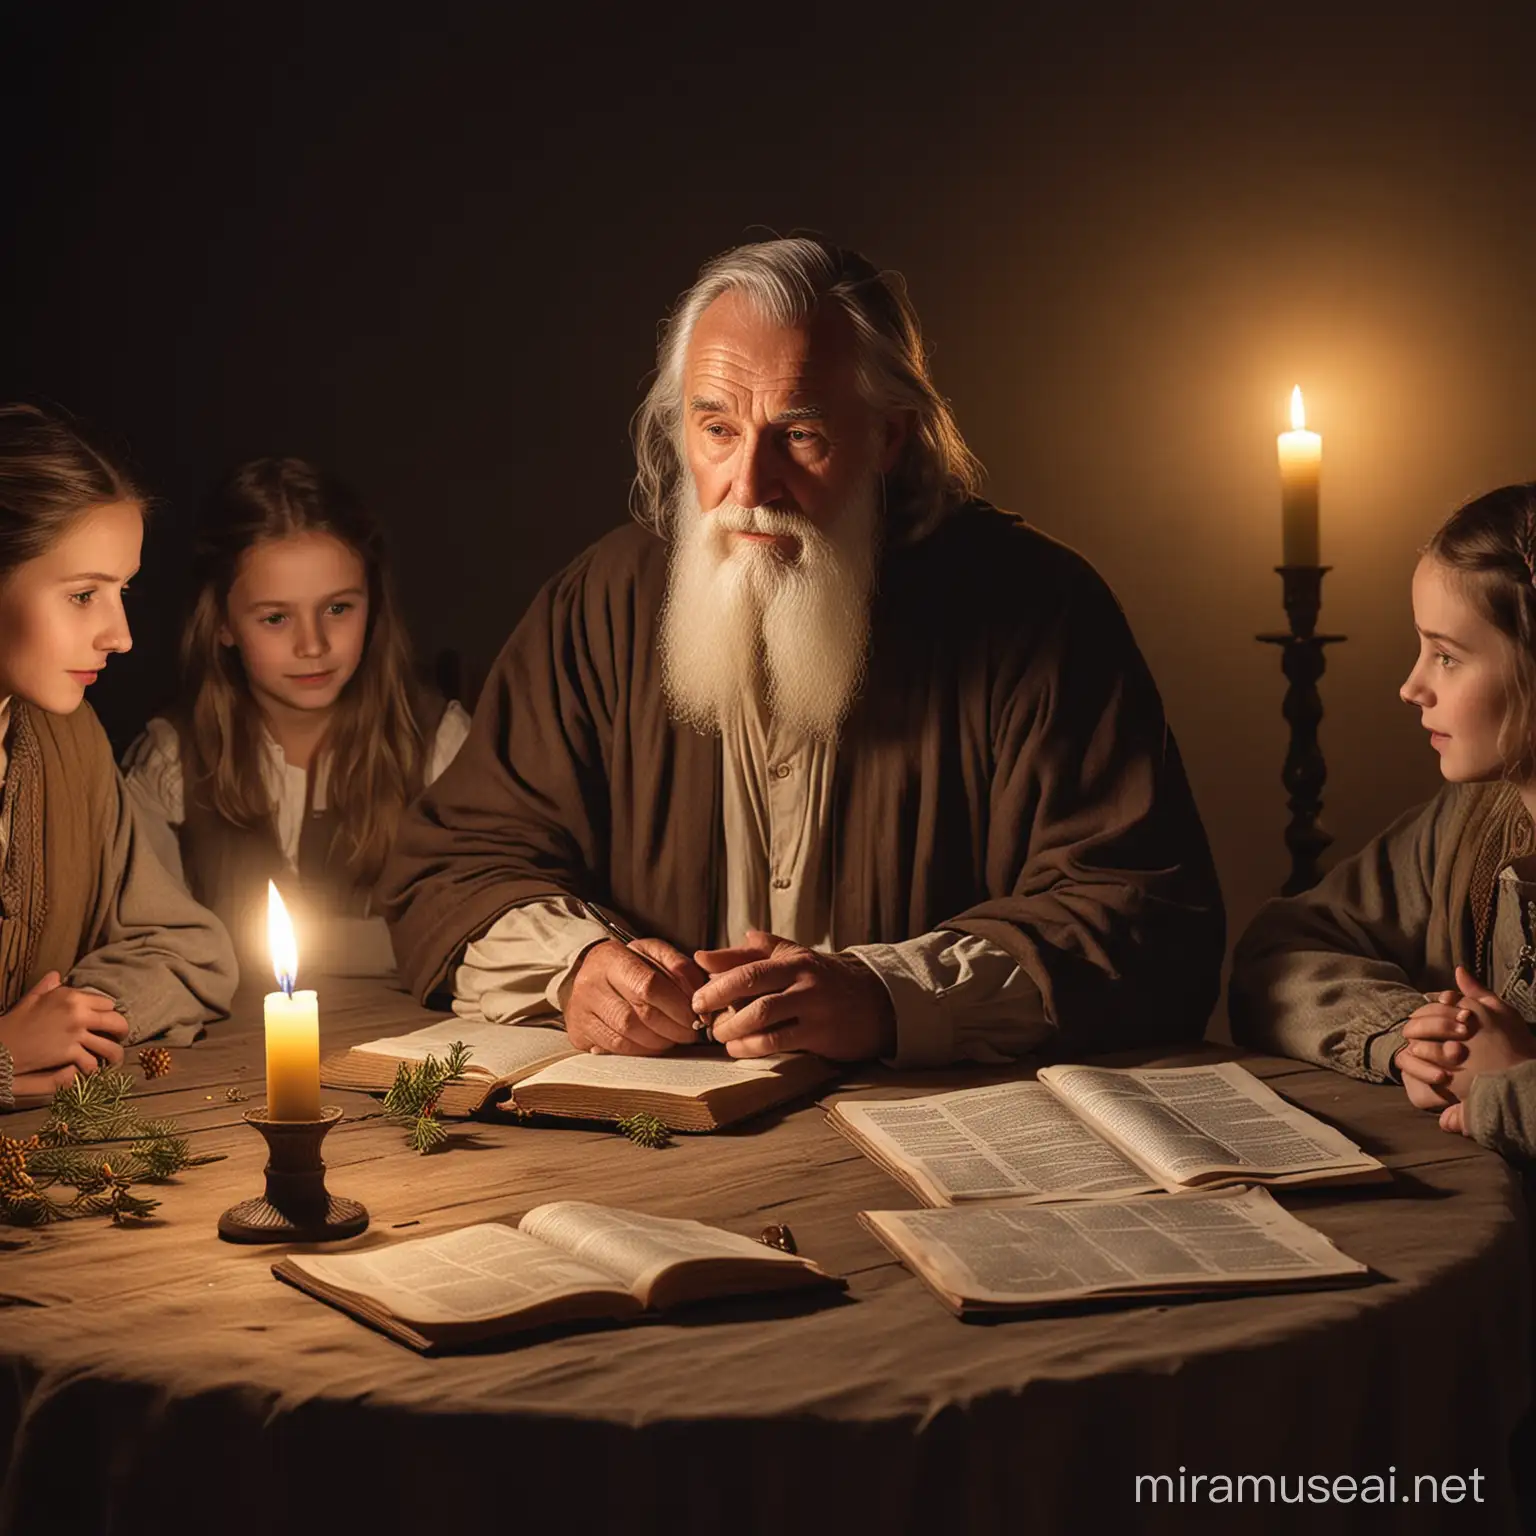 Wise Father Sharing Parables at Candlelit Table